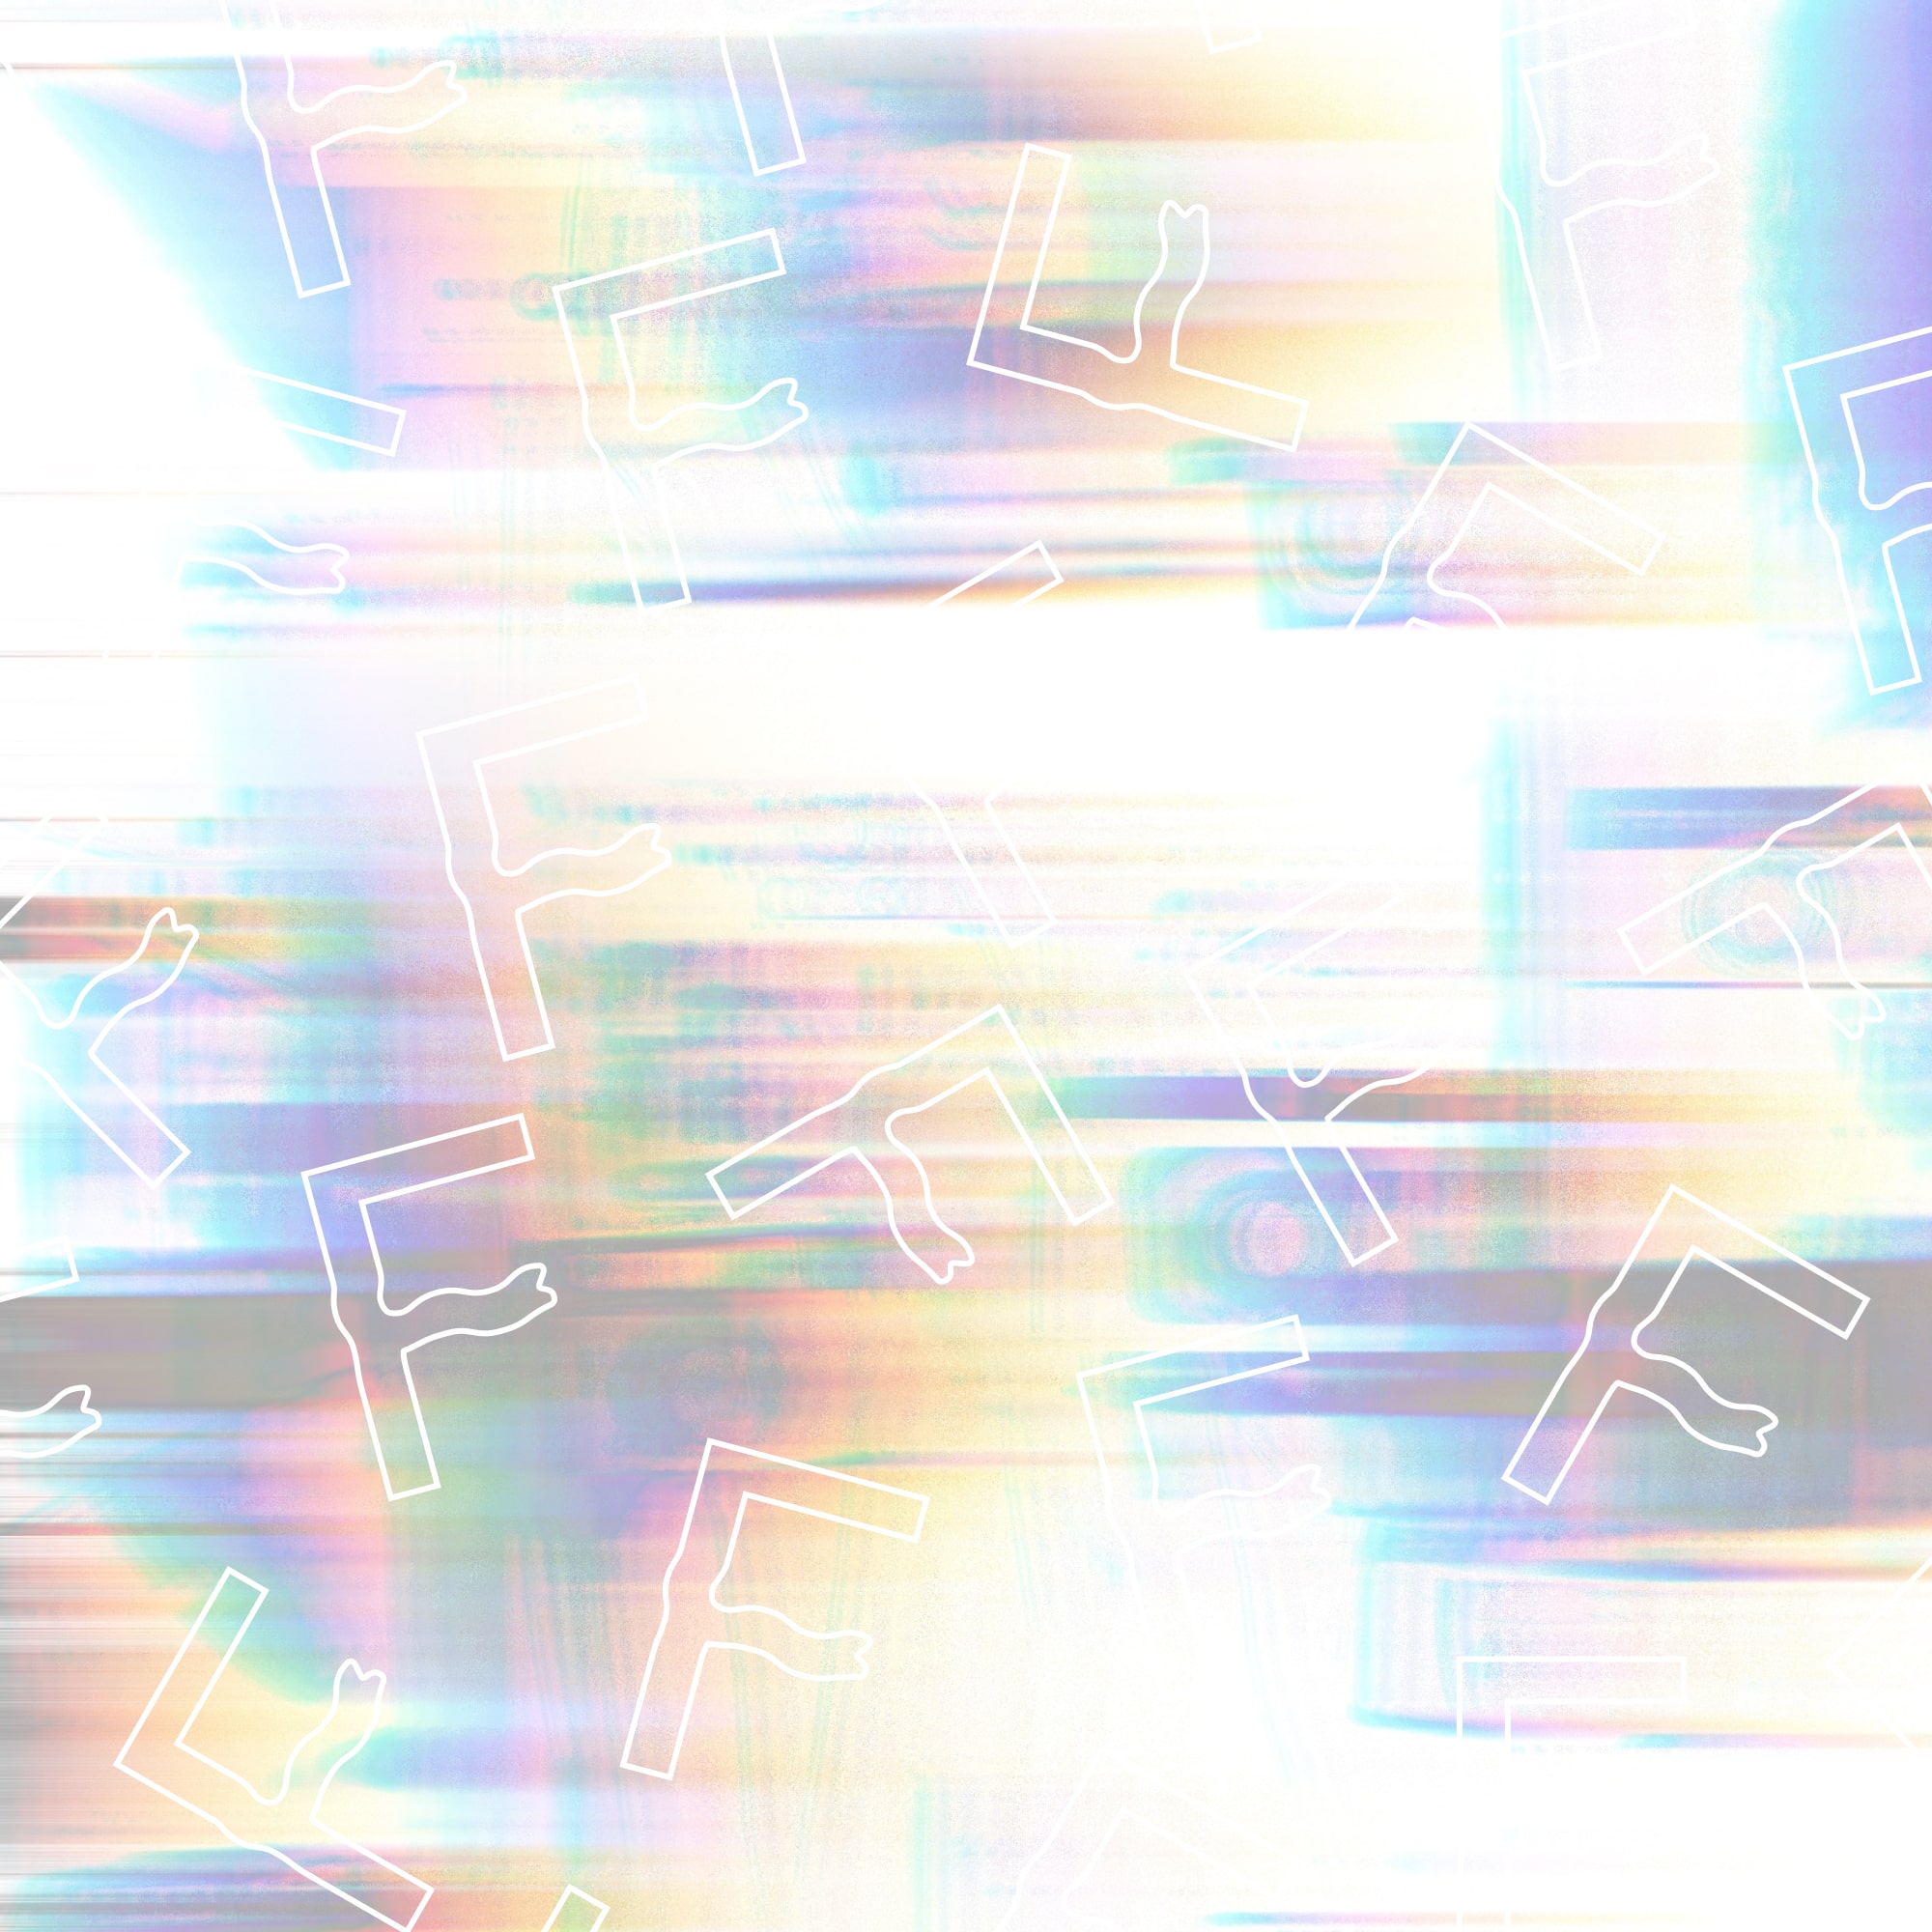 frequenhz pattern in a glitched holographic background